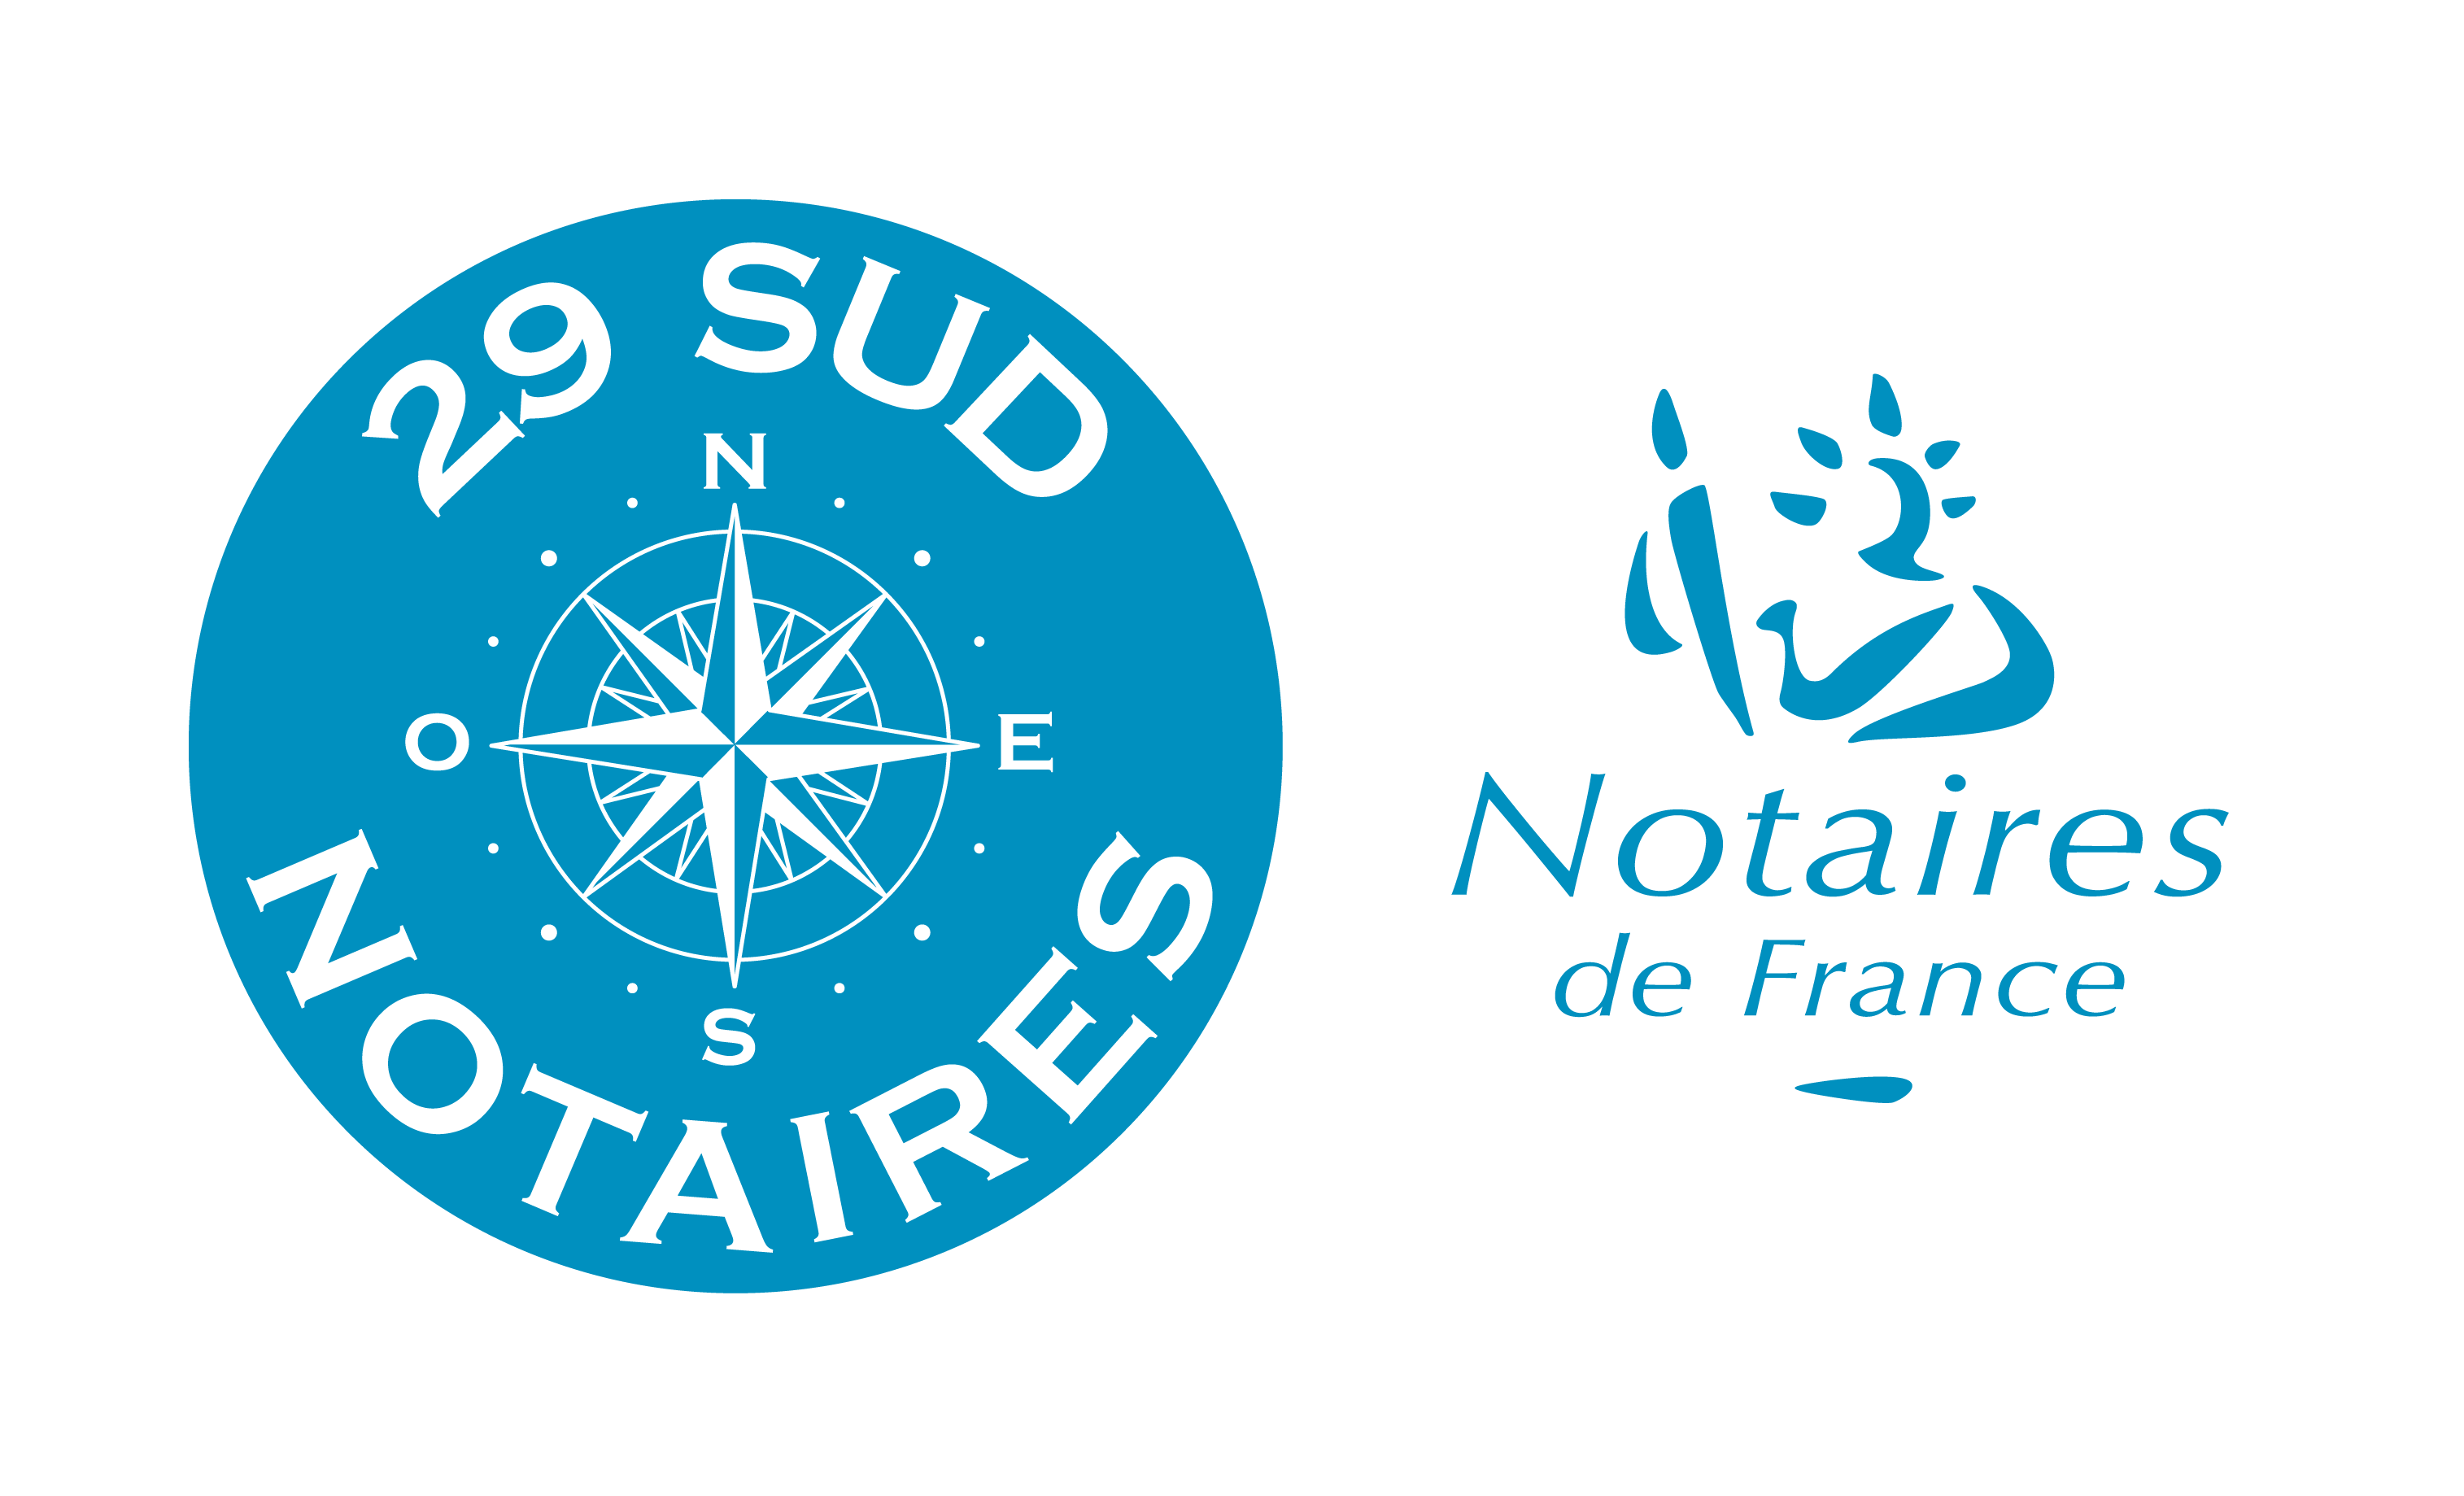 29 sud notaires